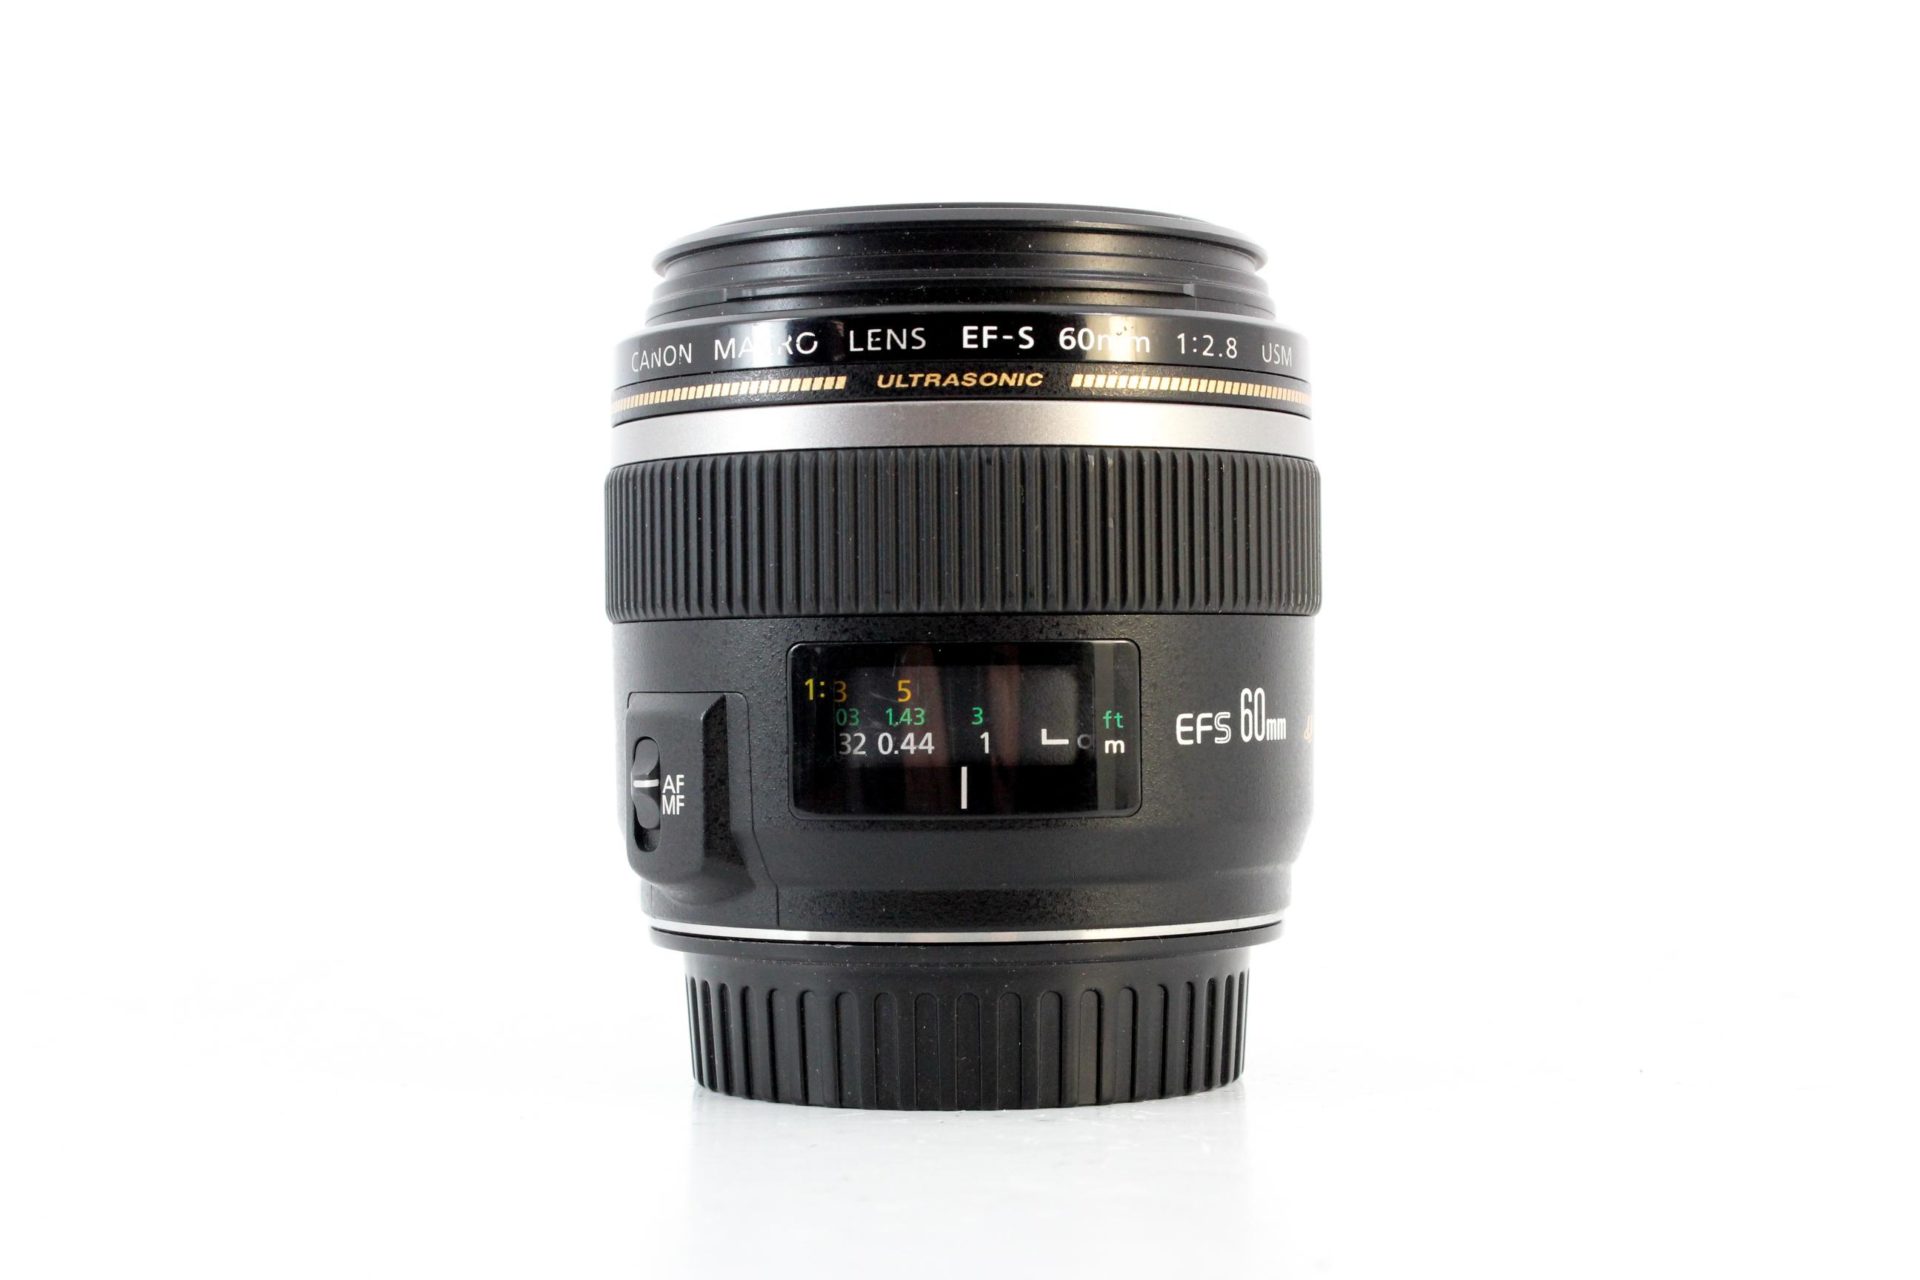 Canon EF-S 60mm f/2.8 USM Macro Lens - Lenses and Cameras